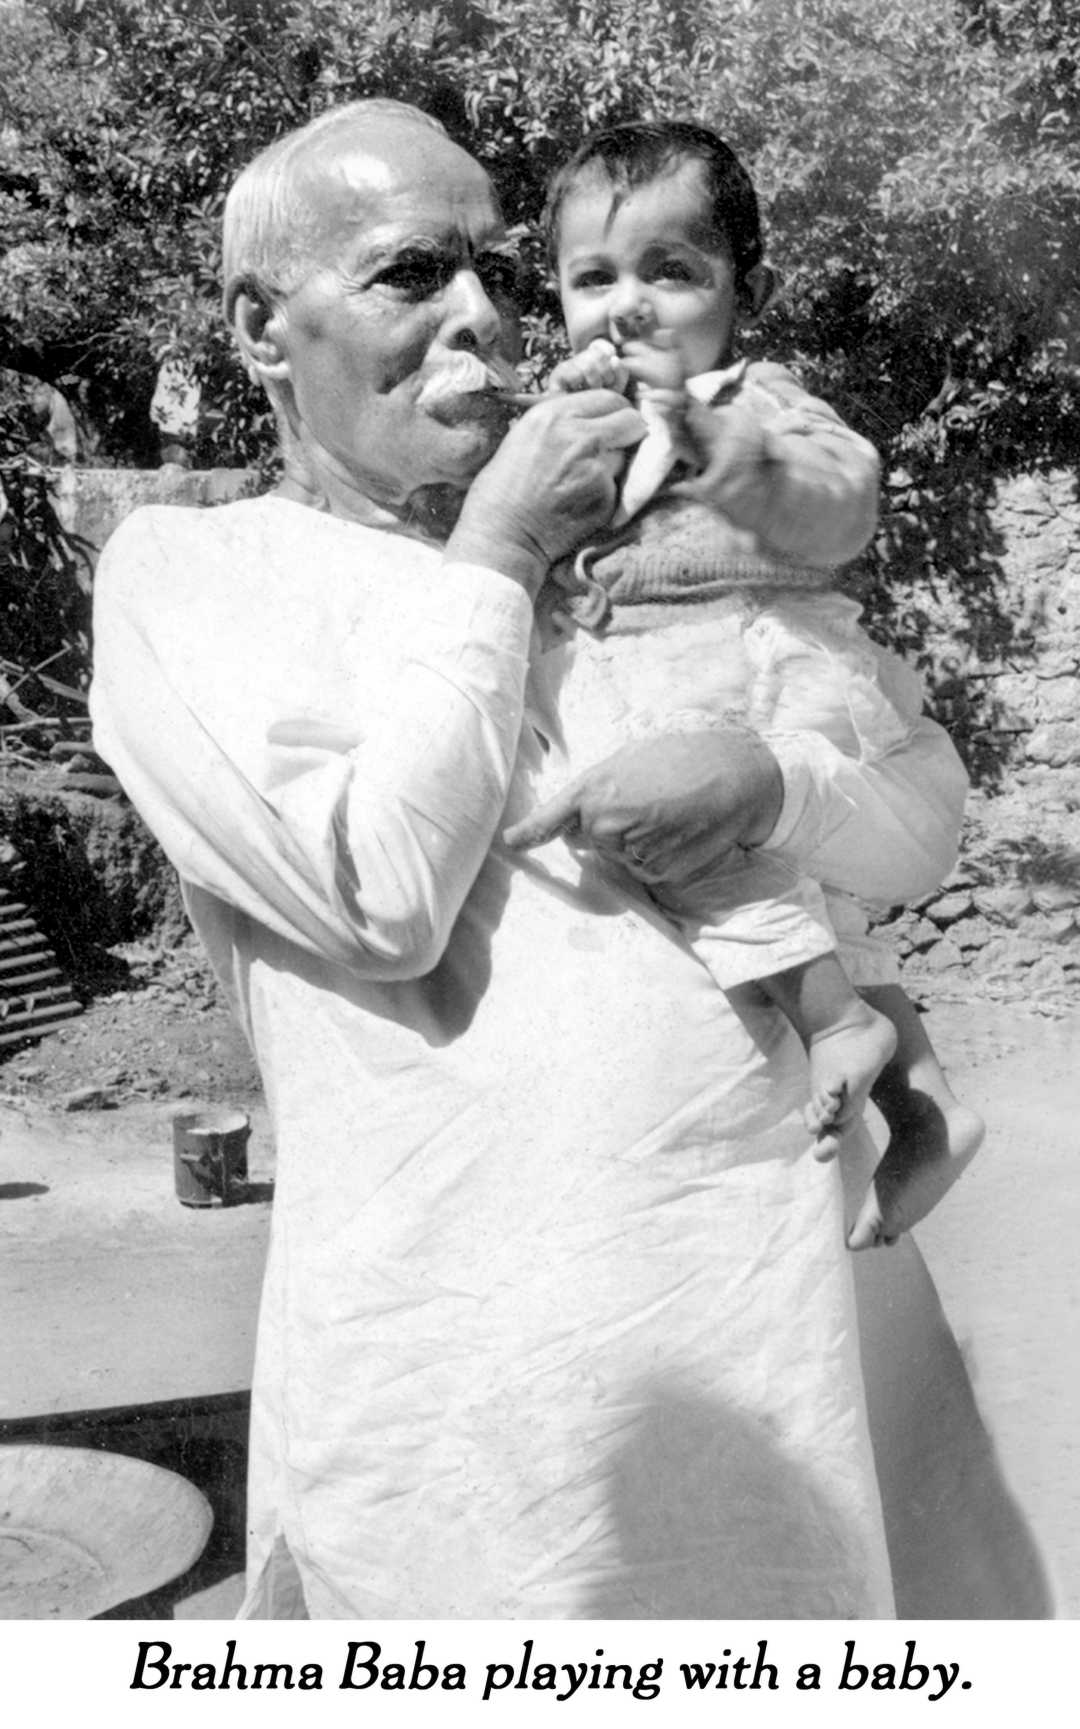 Baba with a baby